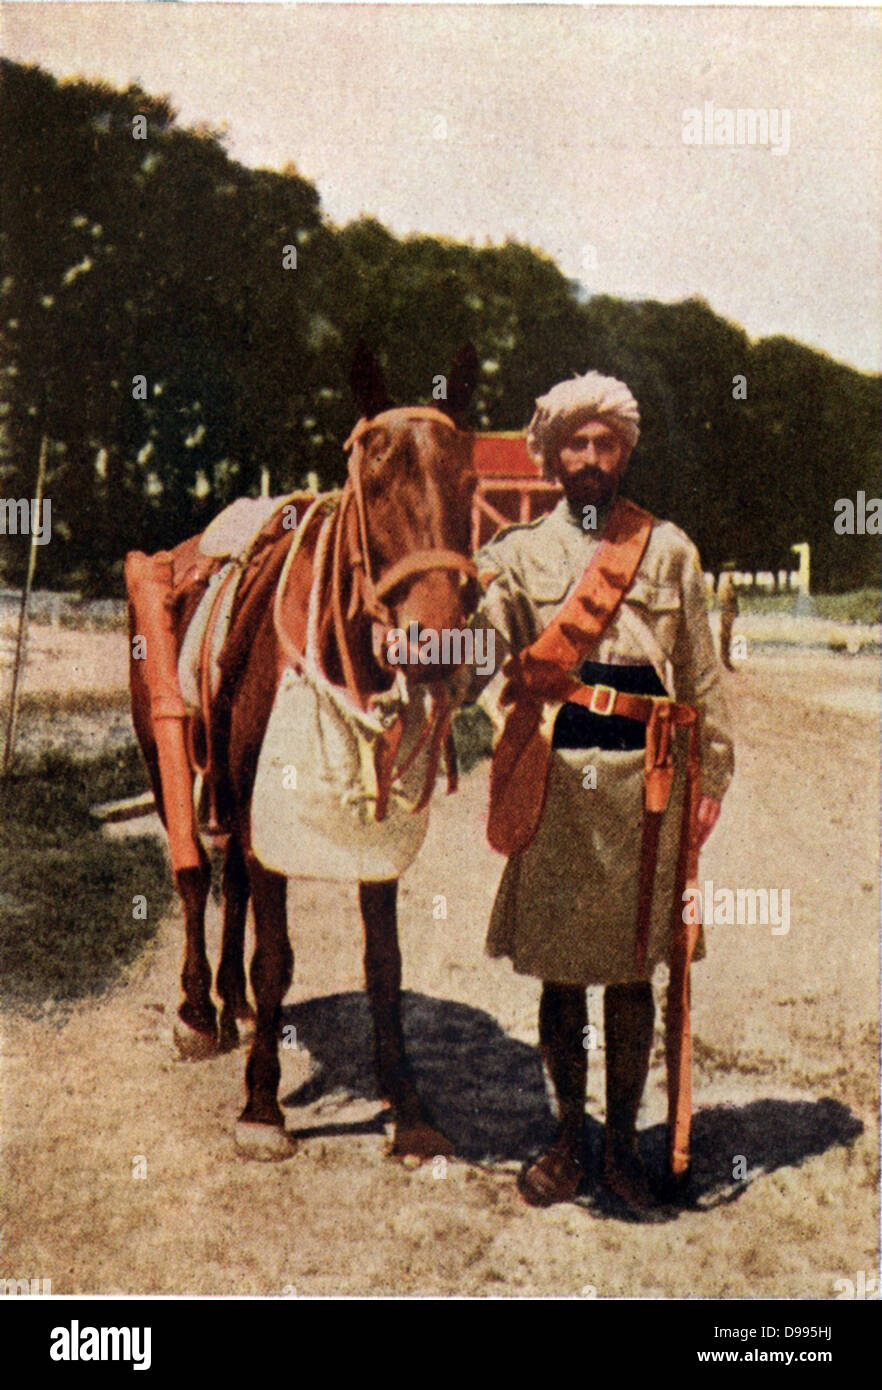 Indian cavalryman in campaign kit, standing beside his mount, c1914. Stock Photo